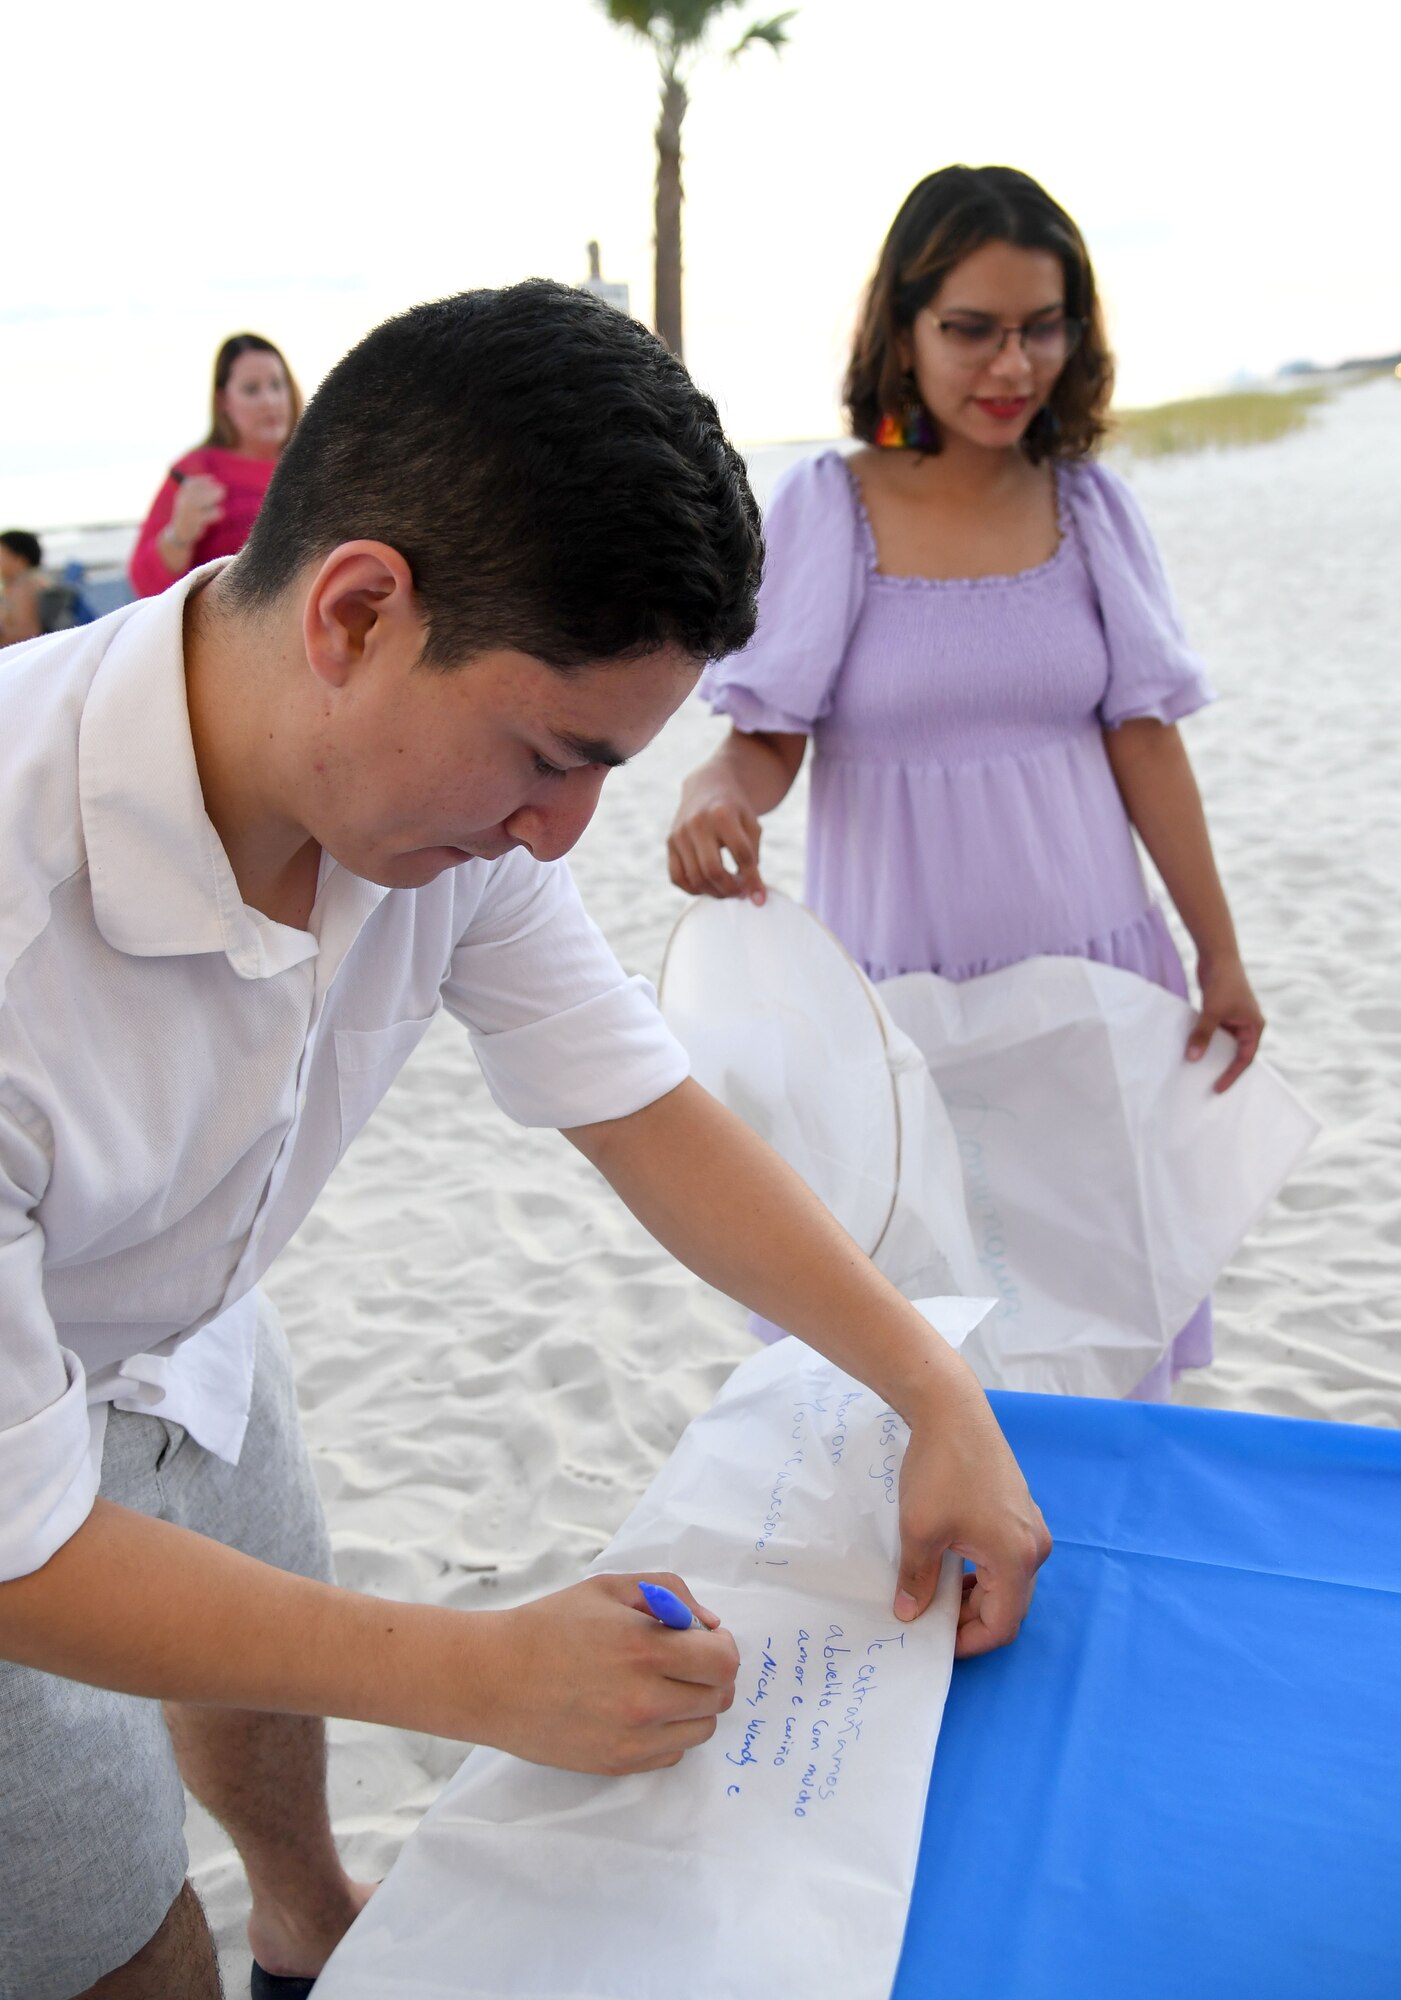 U.S. Air Force Staff Sgt. Nick Dominguez, 334th Training Squadron curriculum developer, writes a message on a lantern during the Gold Star Families Sky Lantern Release on the Biloxi Beach, Mississippi, Sept. 23, 2022. The event, hosted by Keesler Air Force Base, included eco-friendly sky lanterns released in honor of fallen heroes. (U.S. Air Force photo by Kemberly Groue)